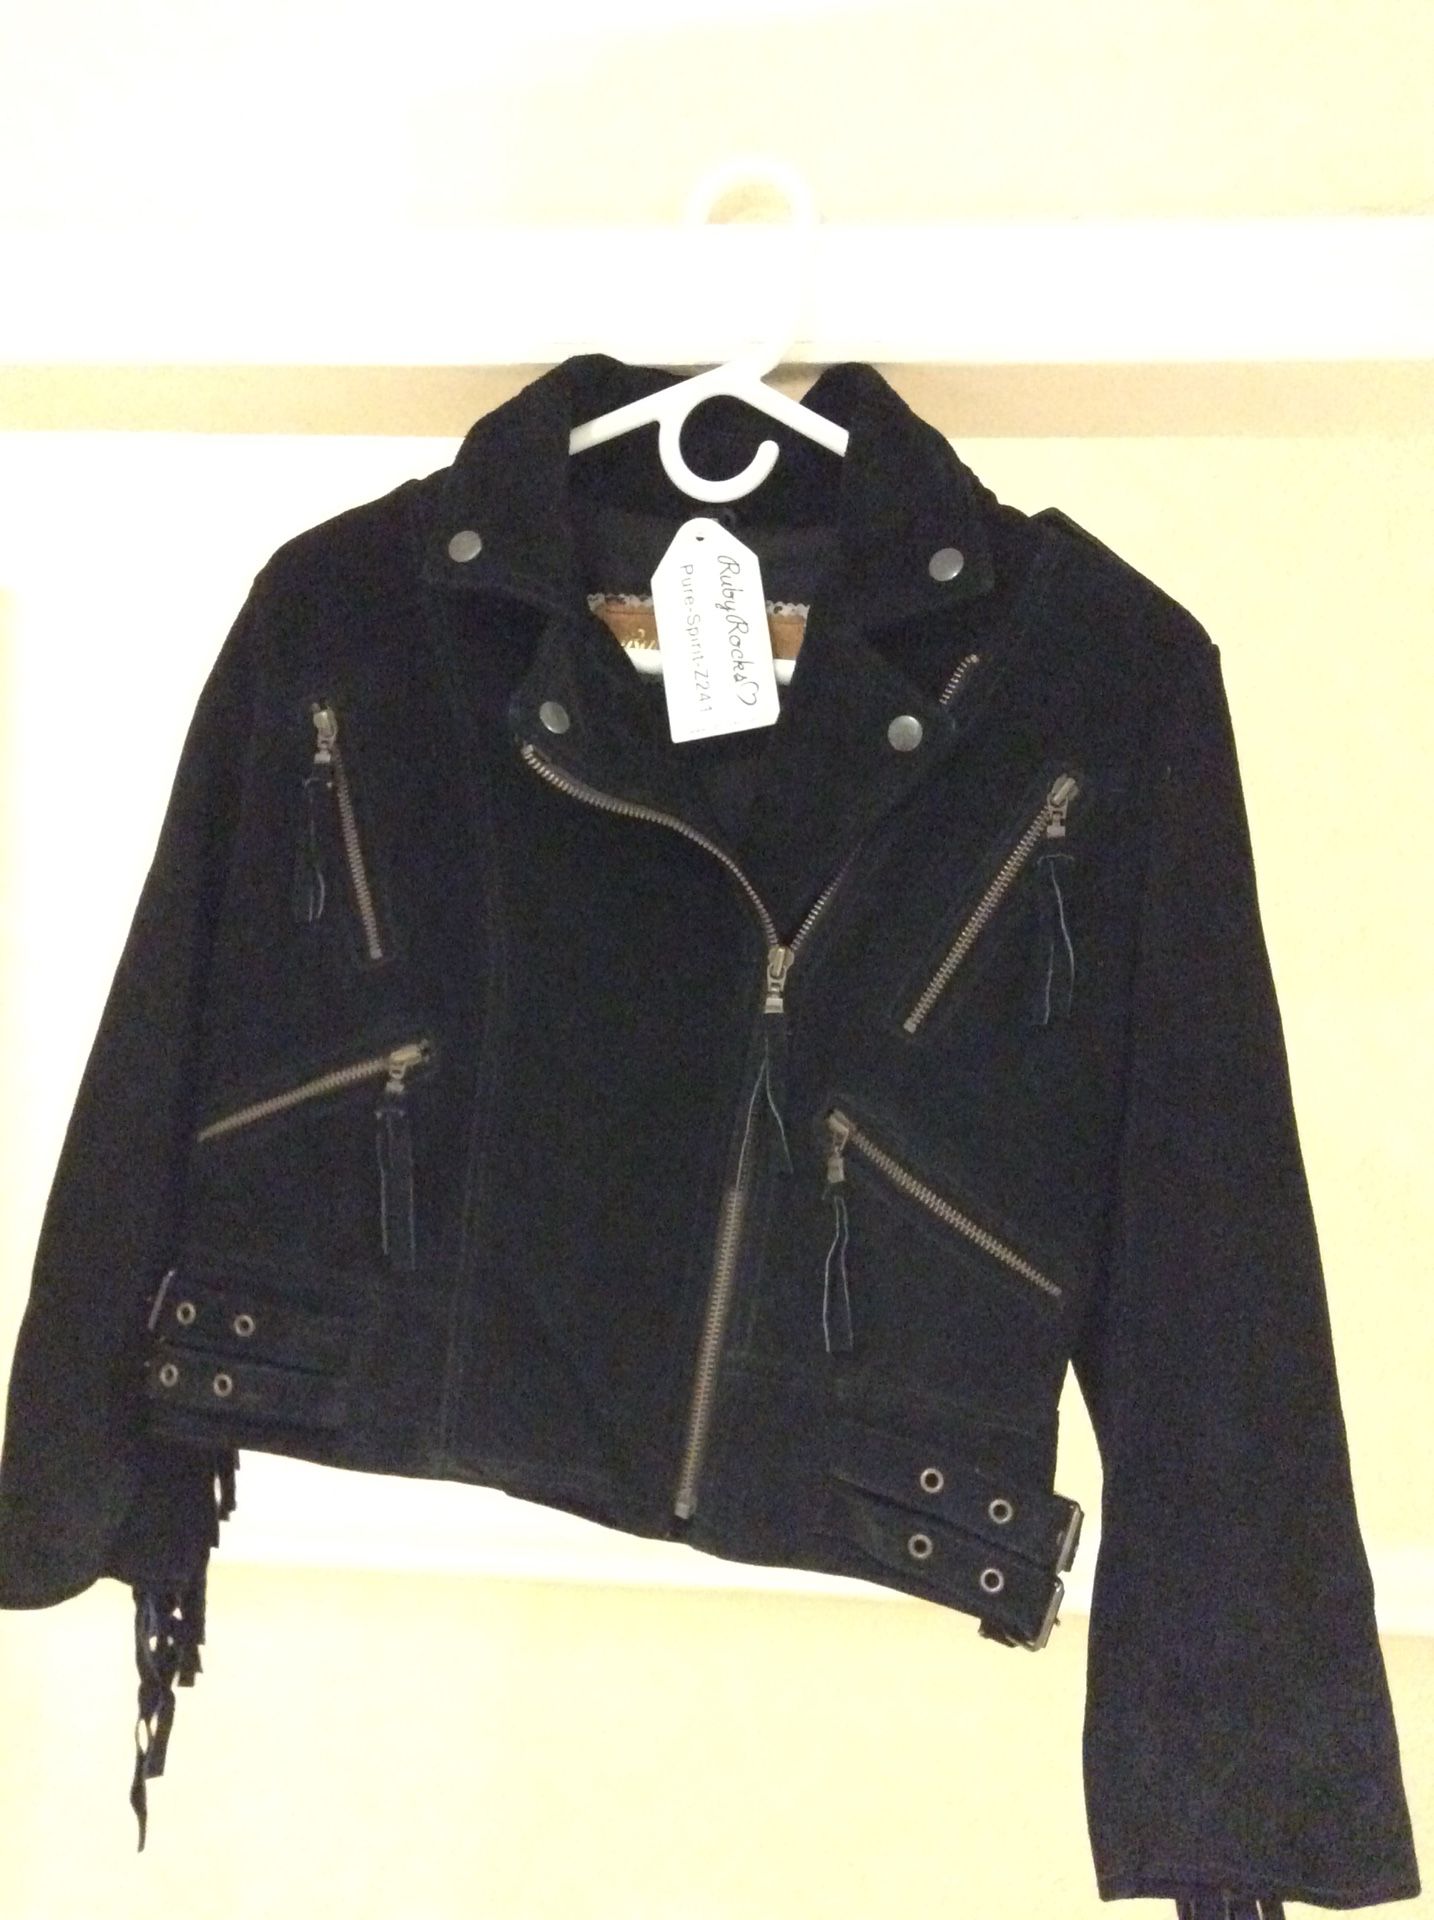 Women’s short genuine suede leather jacket. Size 40 / Small